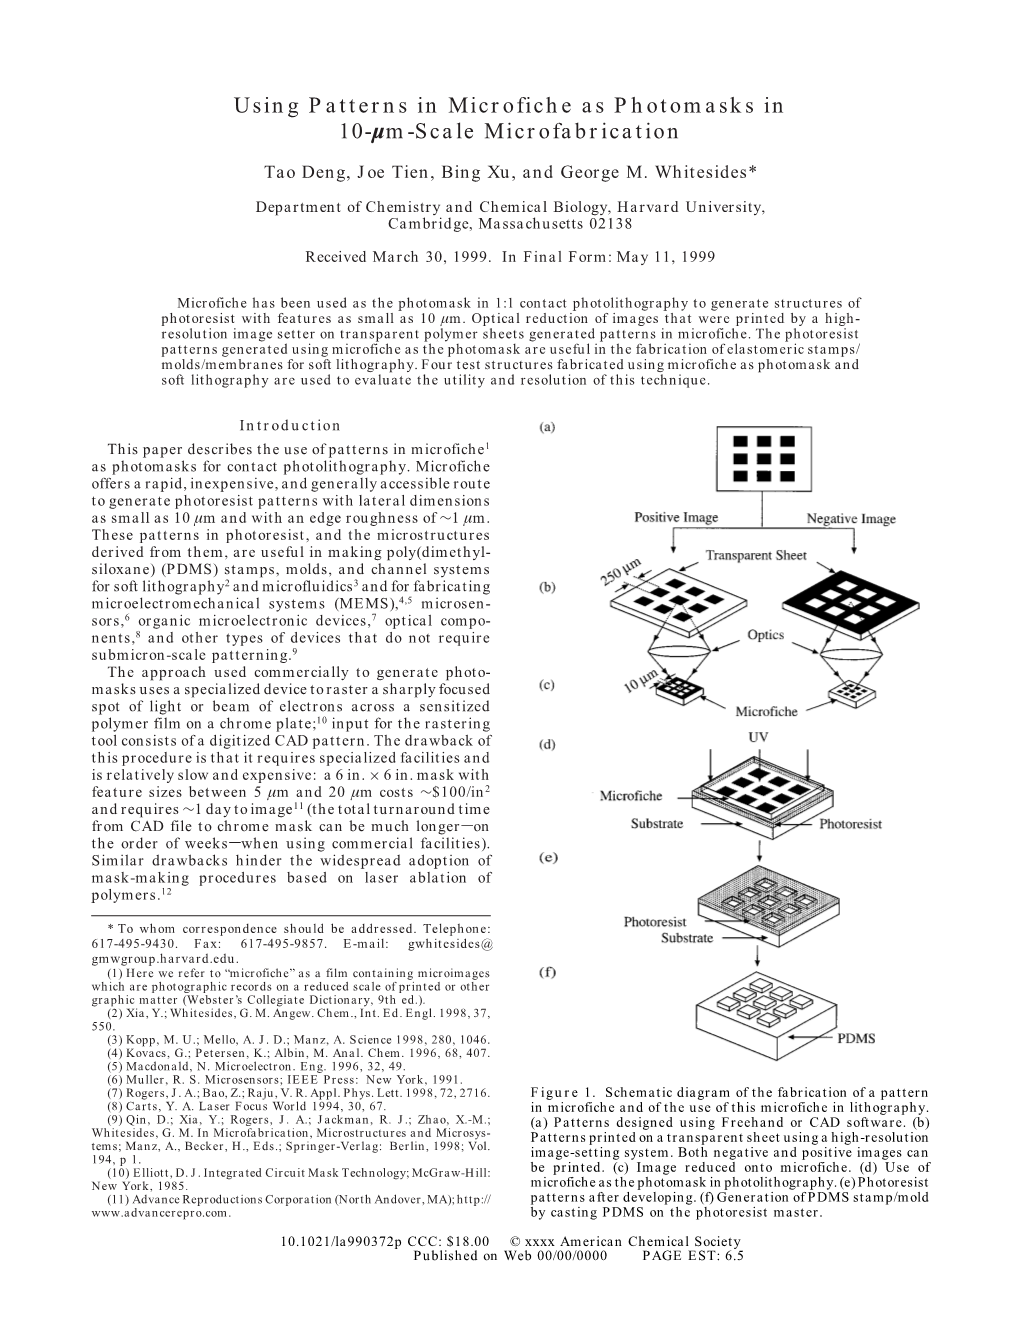 Using Patterns in Microfiche As Photomasks in 10-Μm-Scale Microfabrication